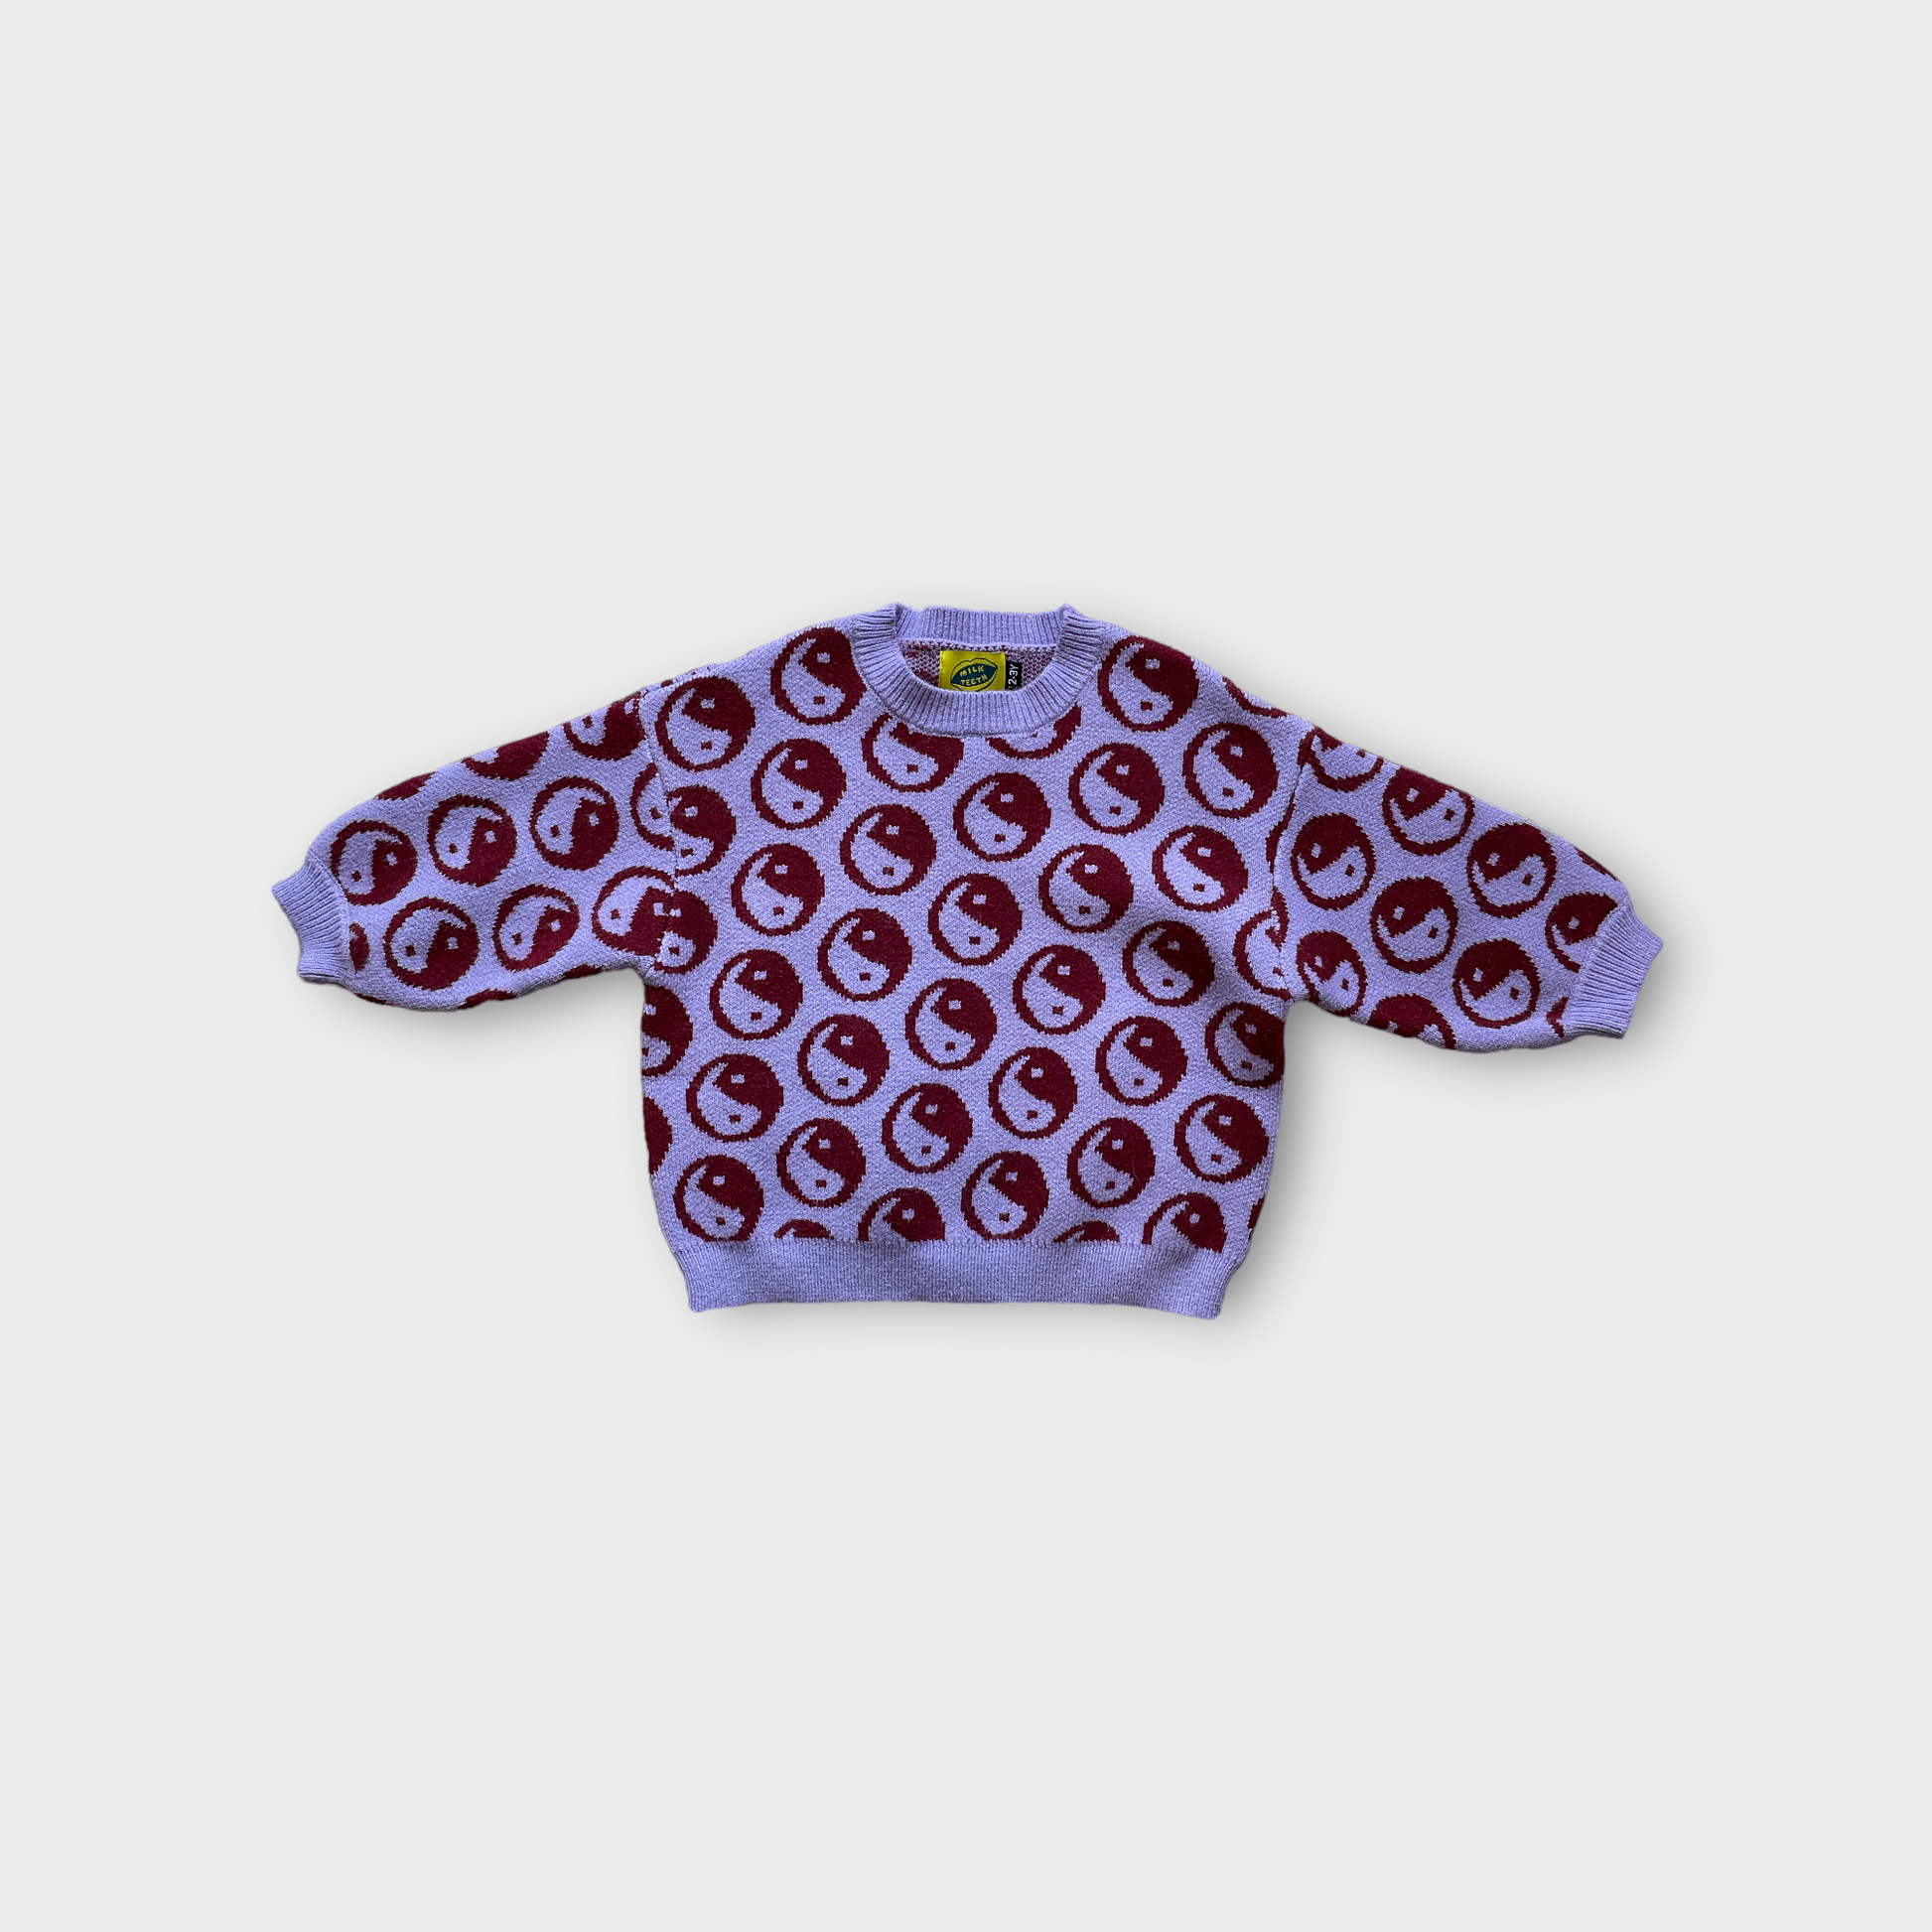 violet kids sweater covered with dark red ying yang symbols 